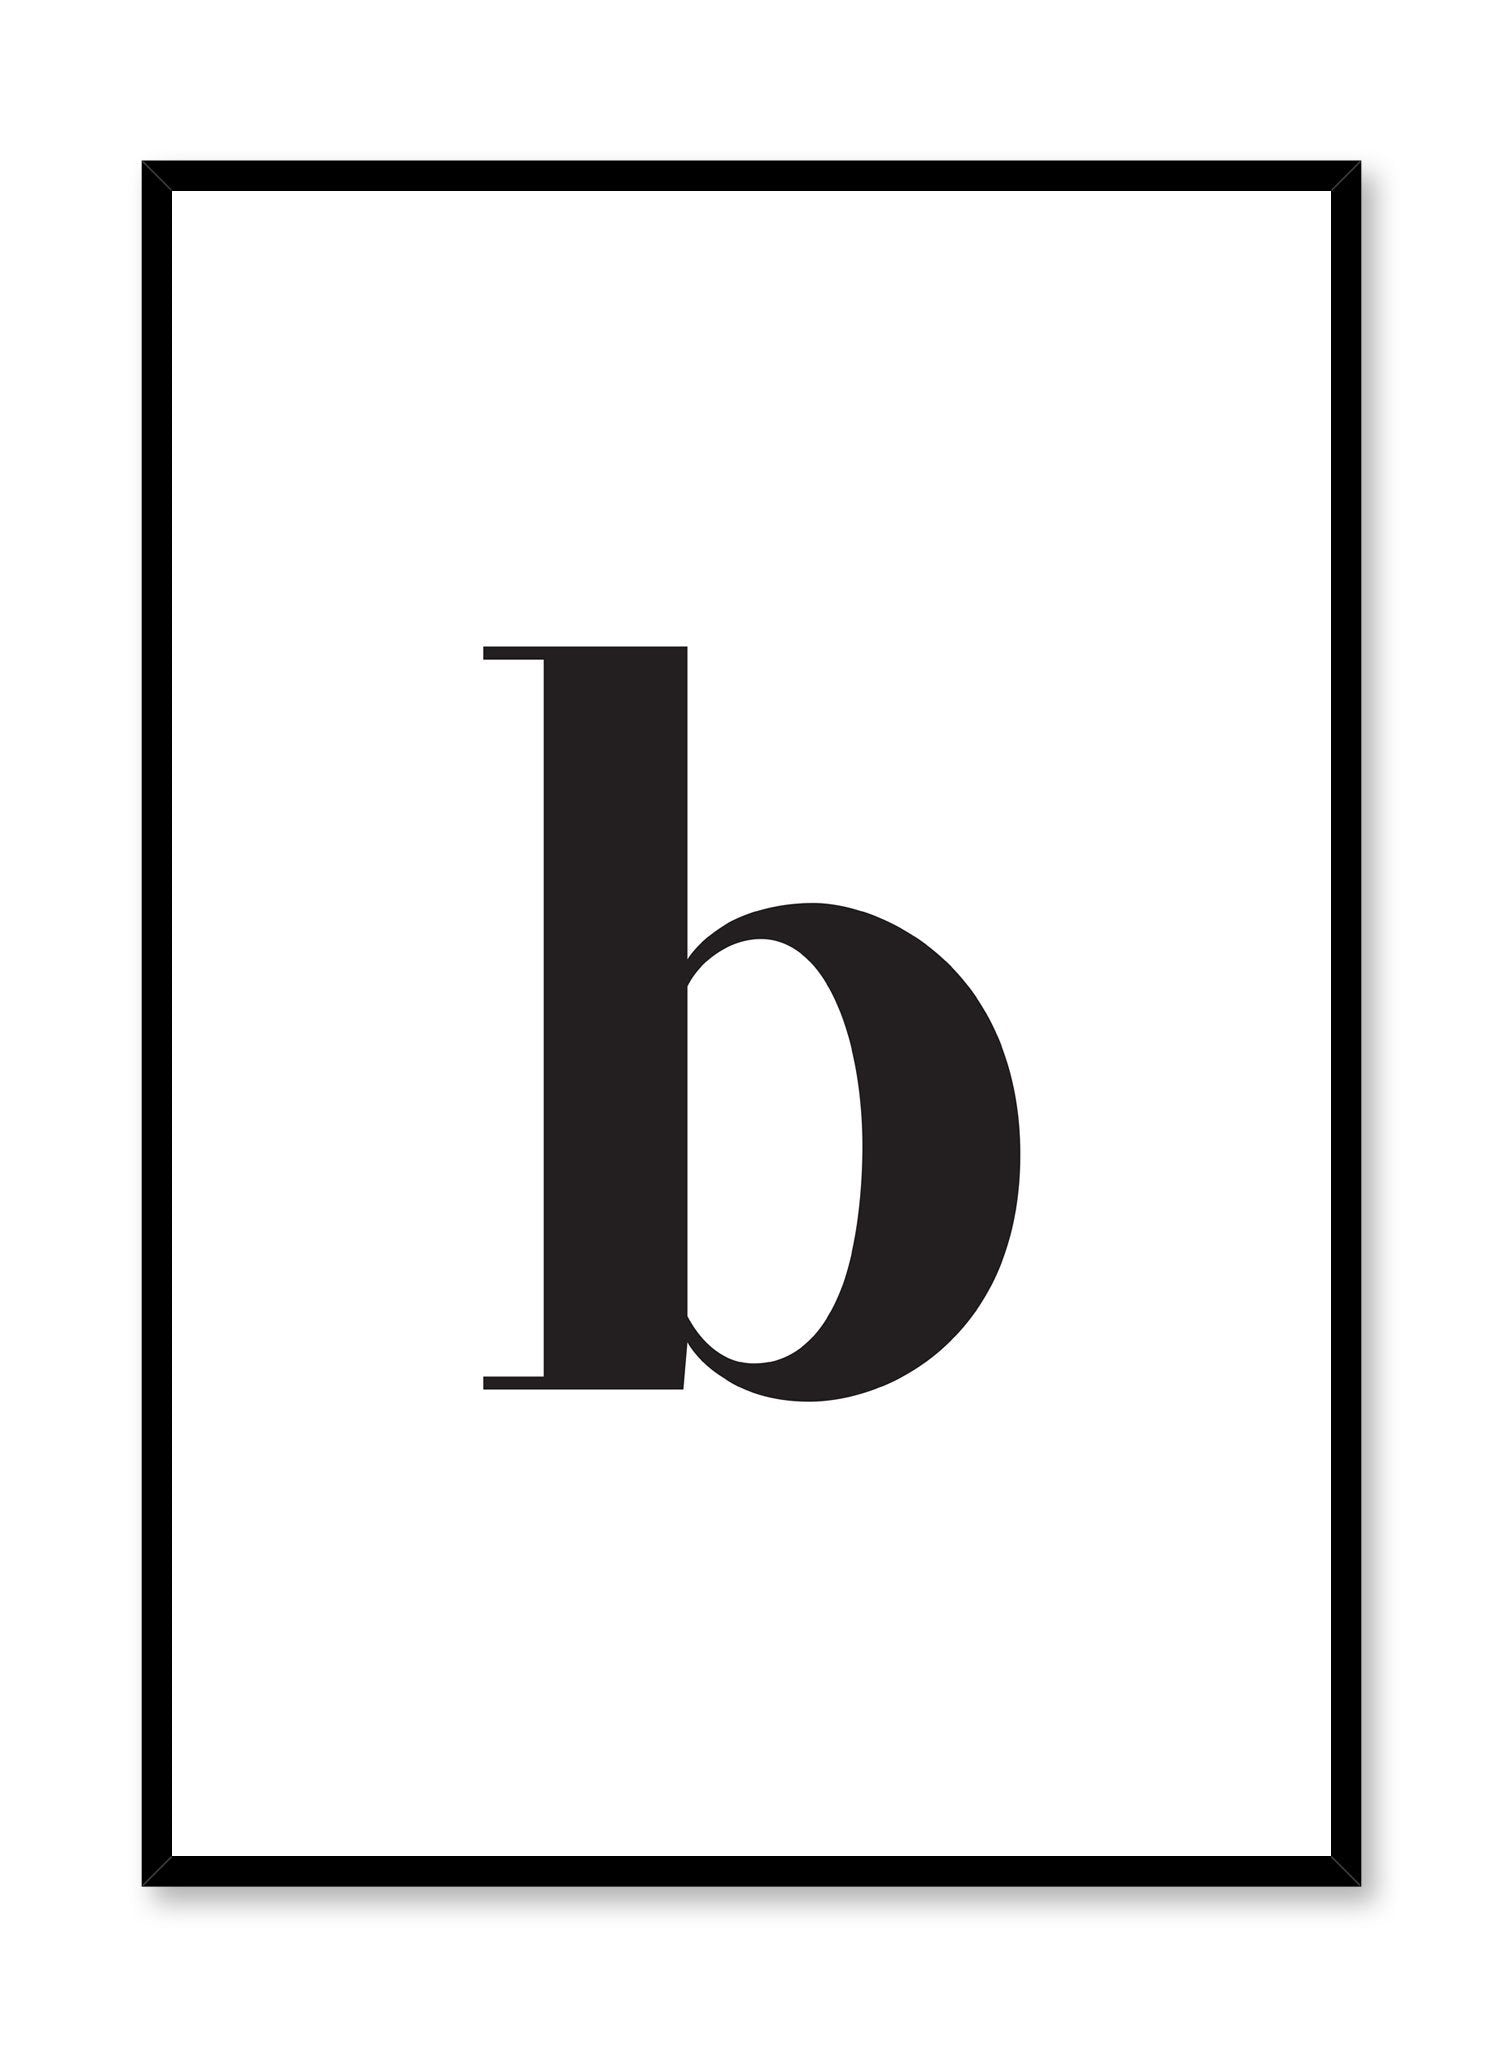 Scandinavian poster with black and white graphic typography design of lowercase letter B by Opposite Wall